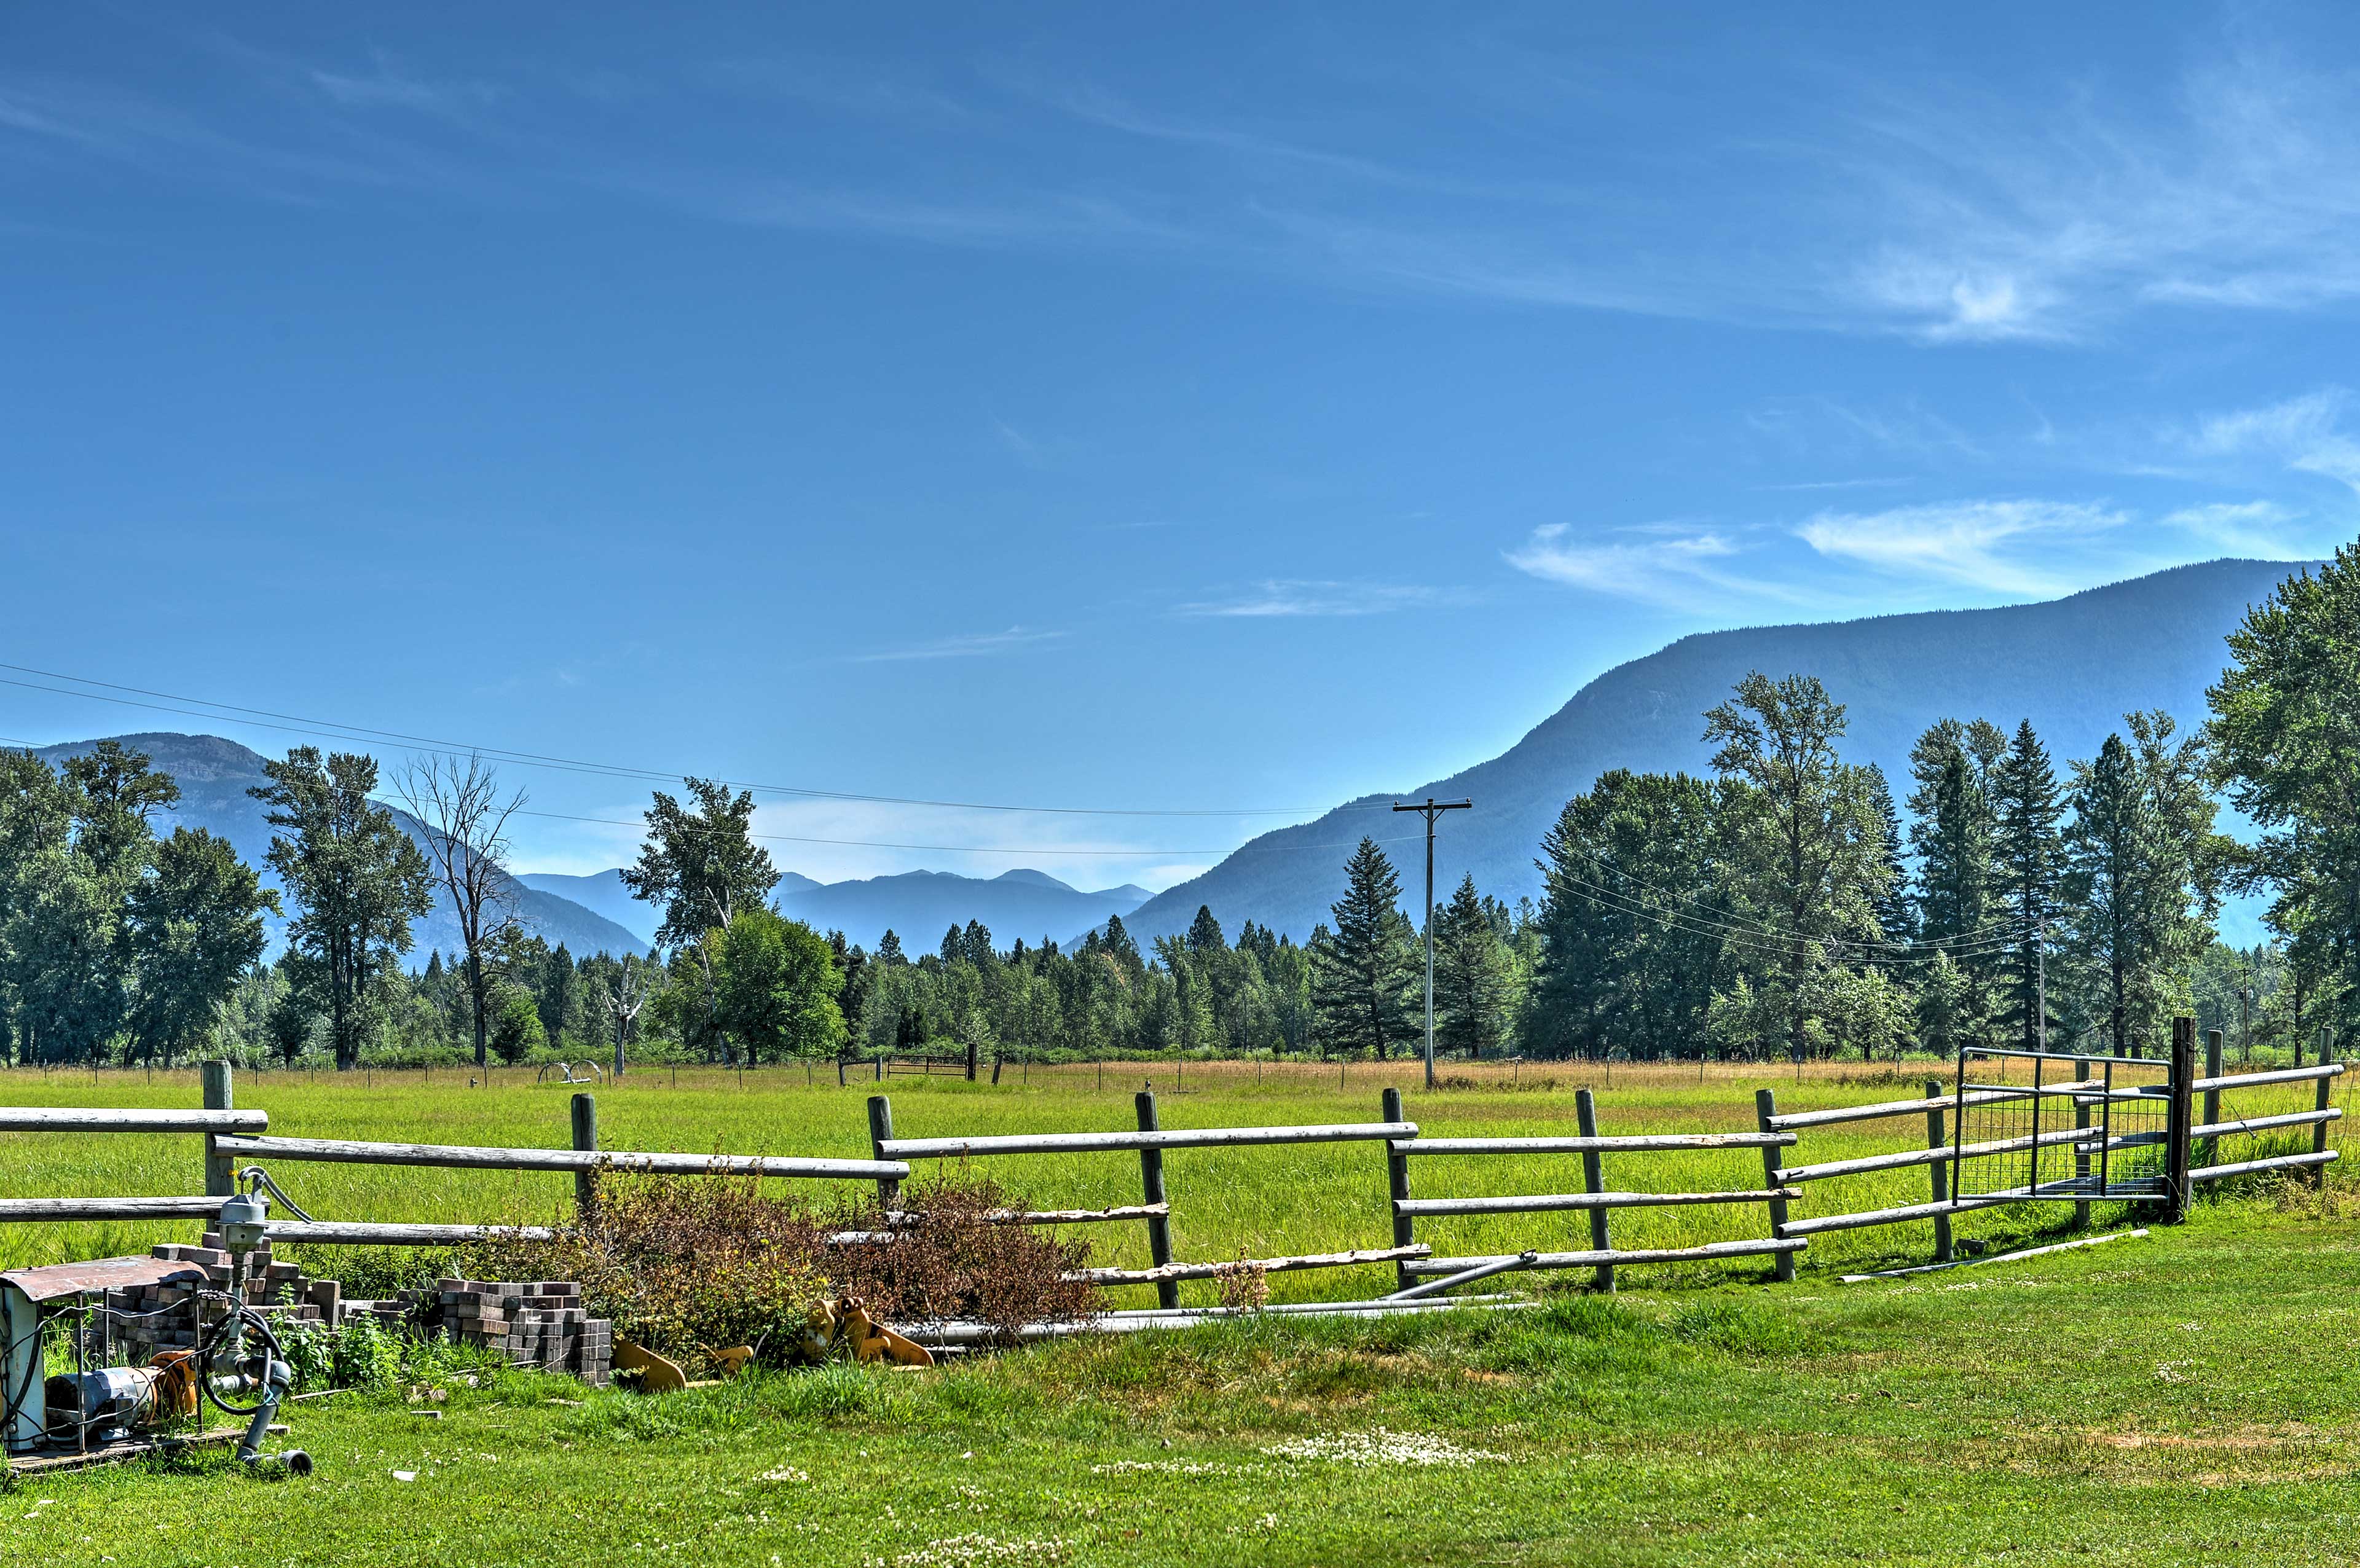 Horses graze and eagles soar on the lush property.